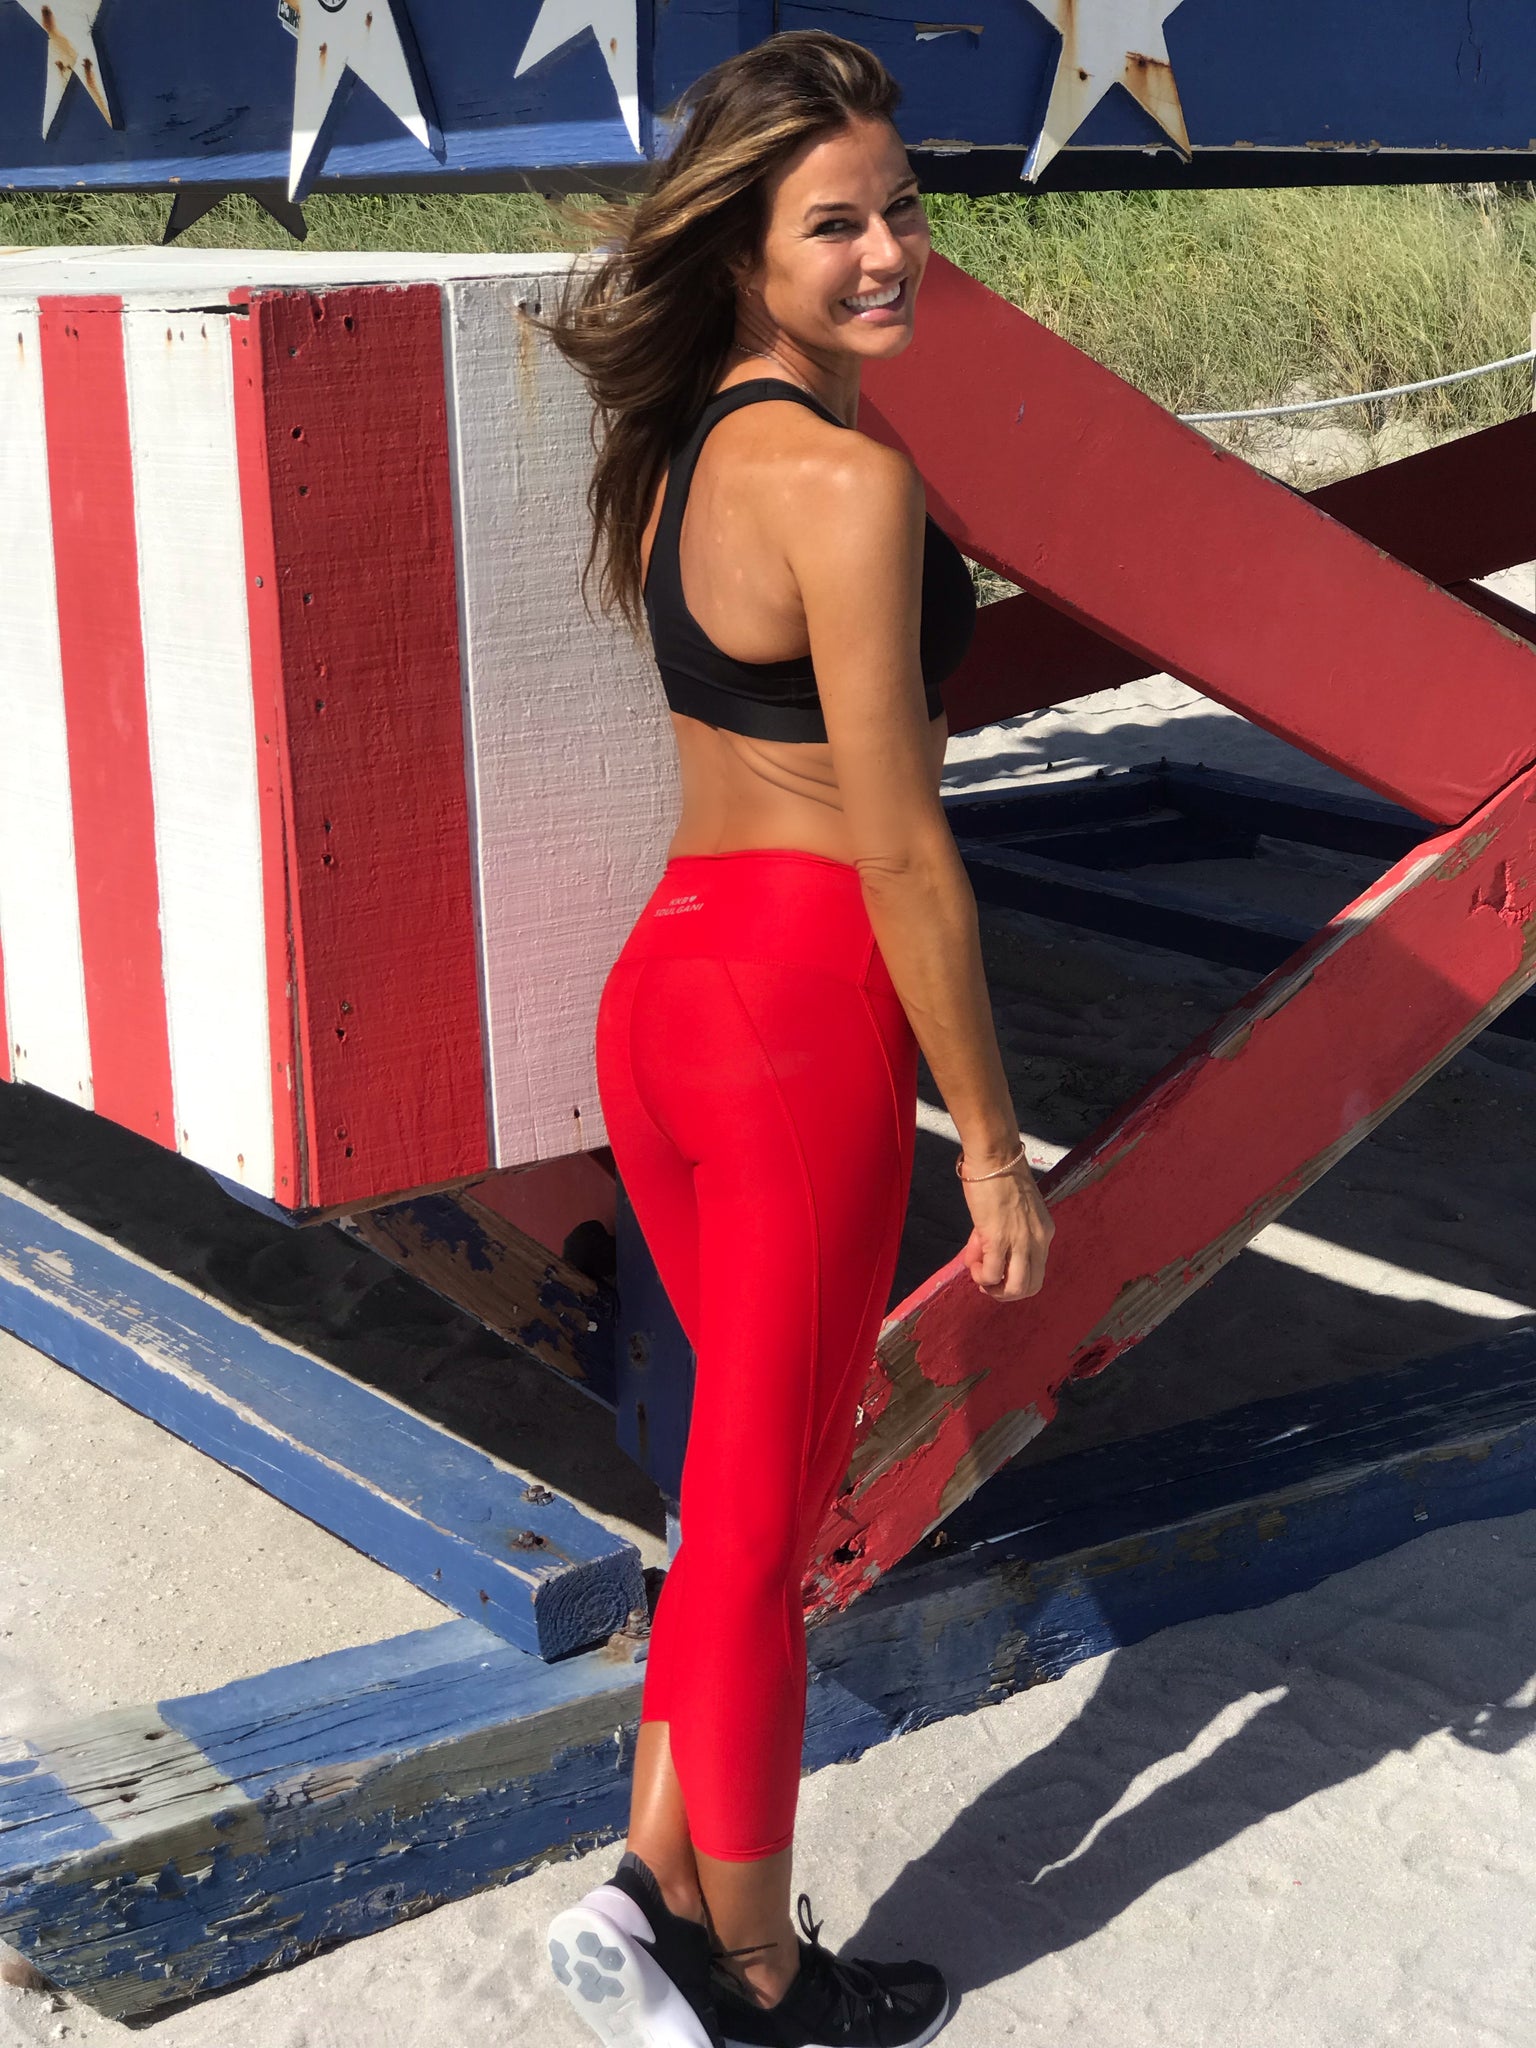 Women Workout Leggings High Waist Push Up Leggings Fashion Ladies Fitness  Red Mesh Patchwork Spandex Legging Pants Plus Size - Red - 4A4134591137  Size S | Calças legging, Vestuário fitness, Calças legging femininas